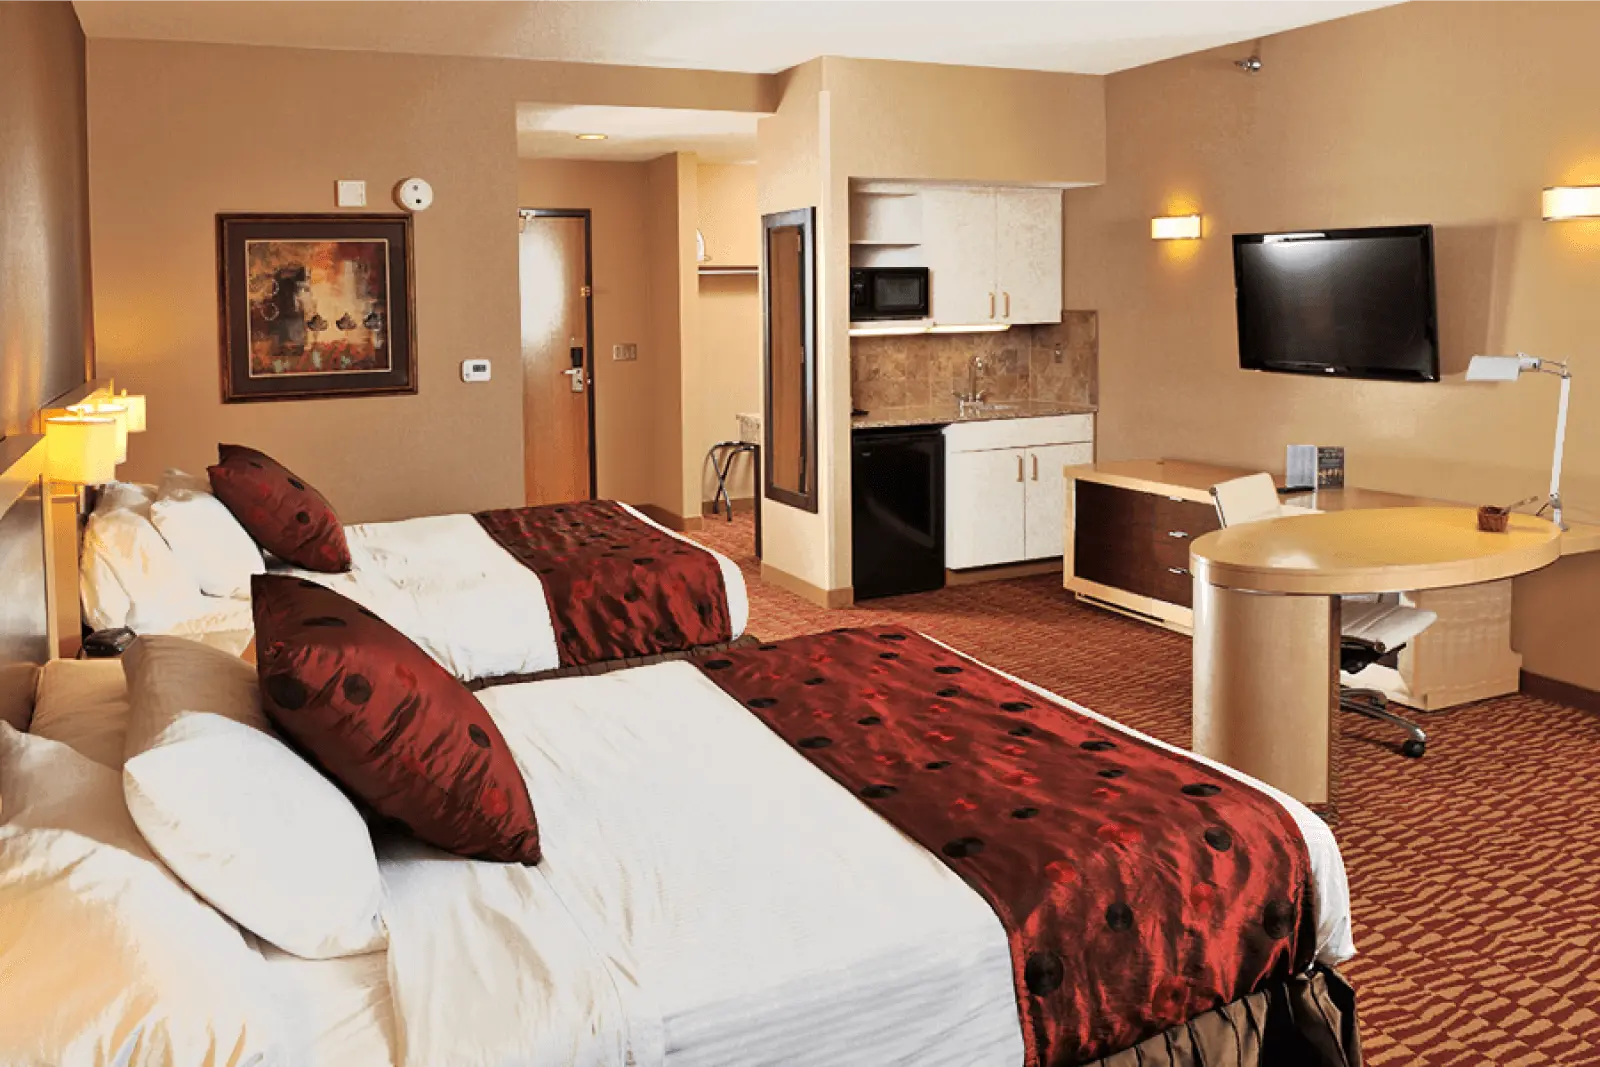 Queen Sized Double Bed Hotel Rooms - Home